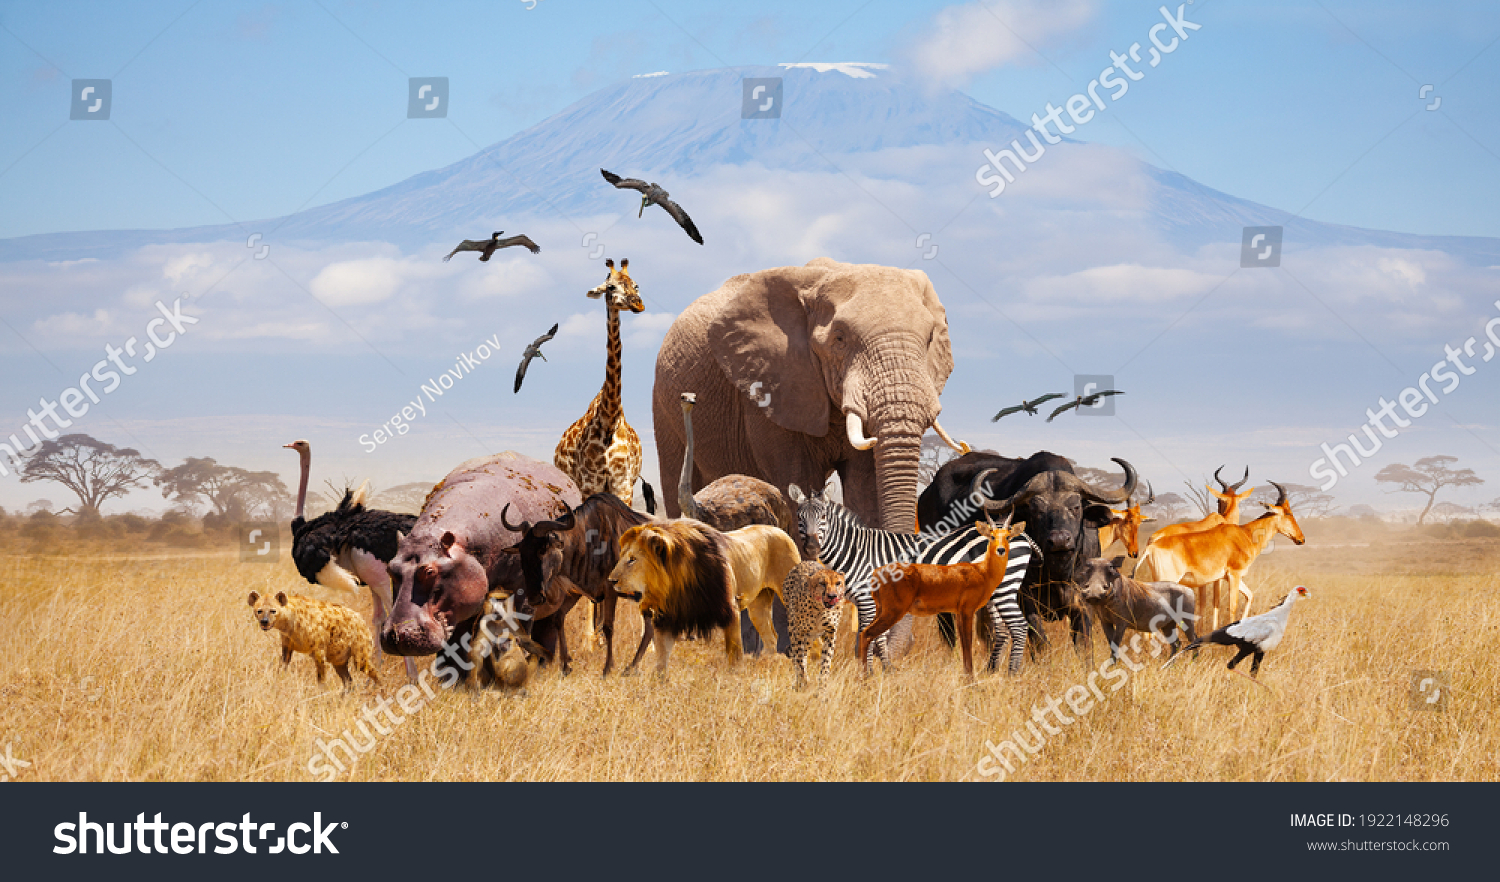 Group of many African animals giraffe, lion, elephant, monkey and others stand together in with Kilimanjaro mountain on background #1922148296